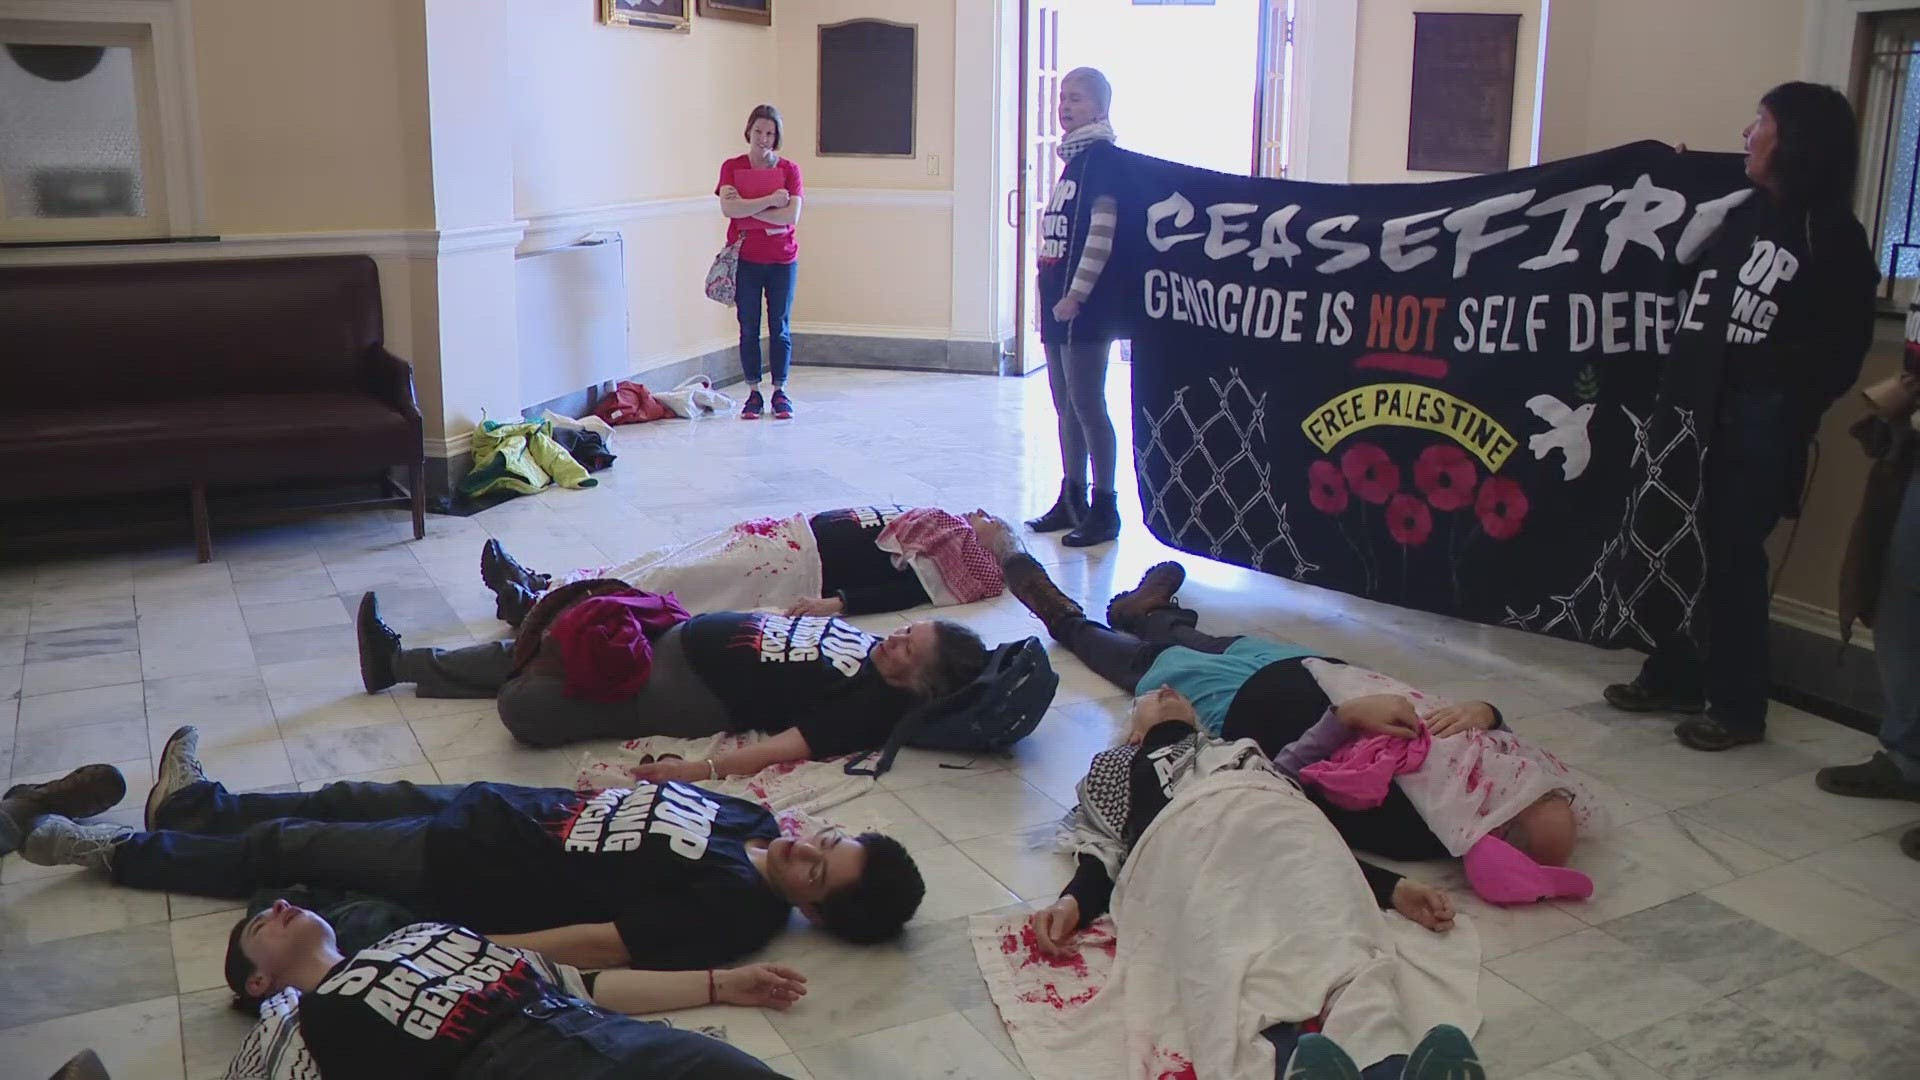 Nearly a dozen people laid on the floor calling for a cease-fire.